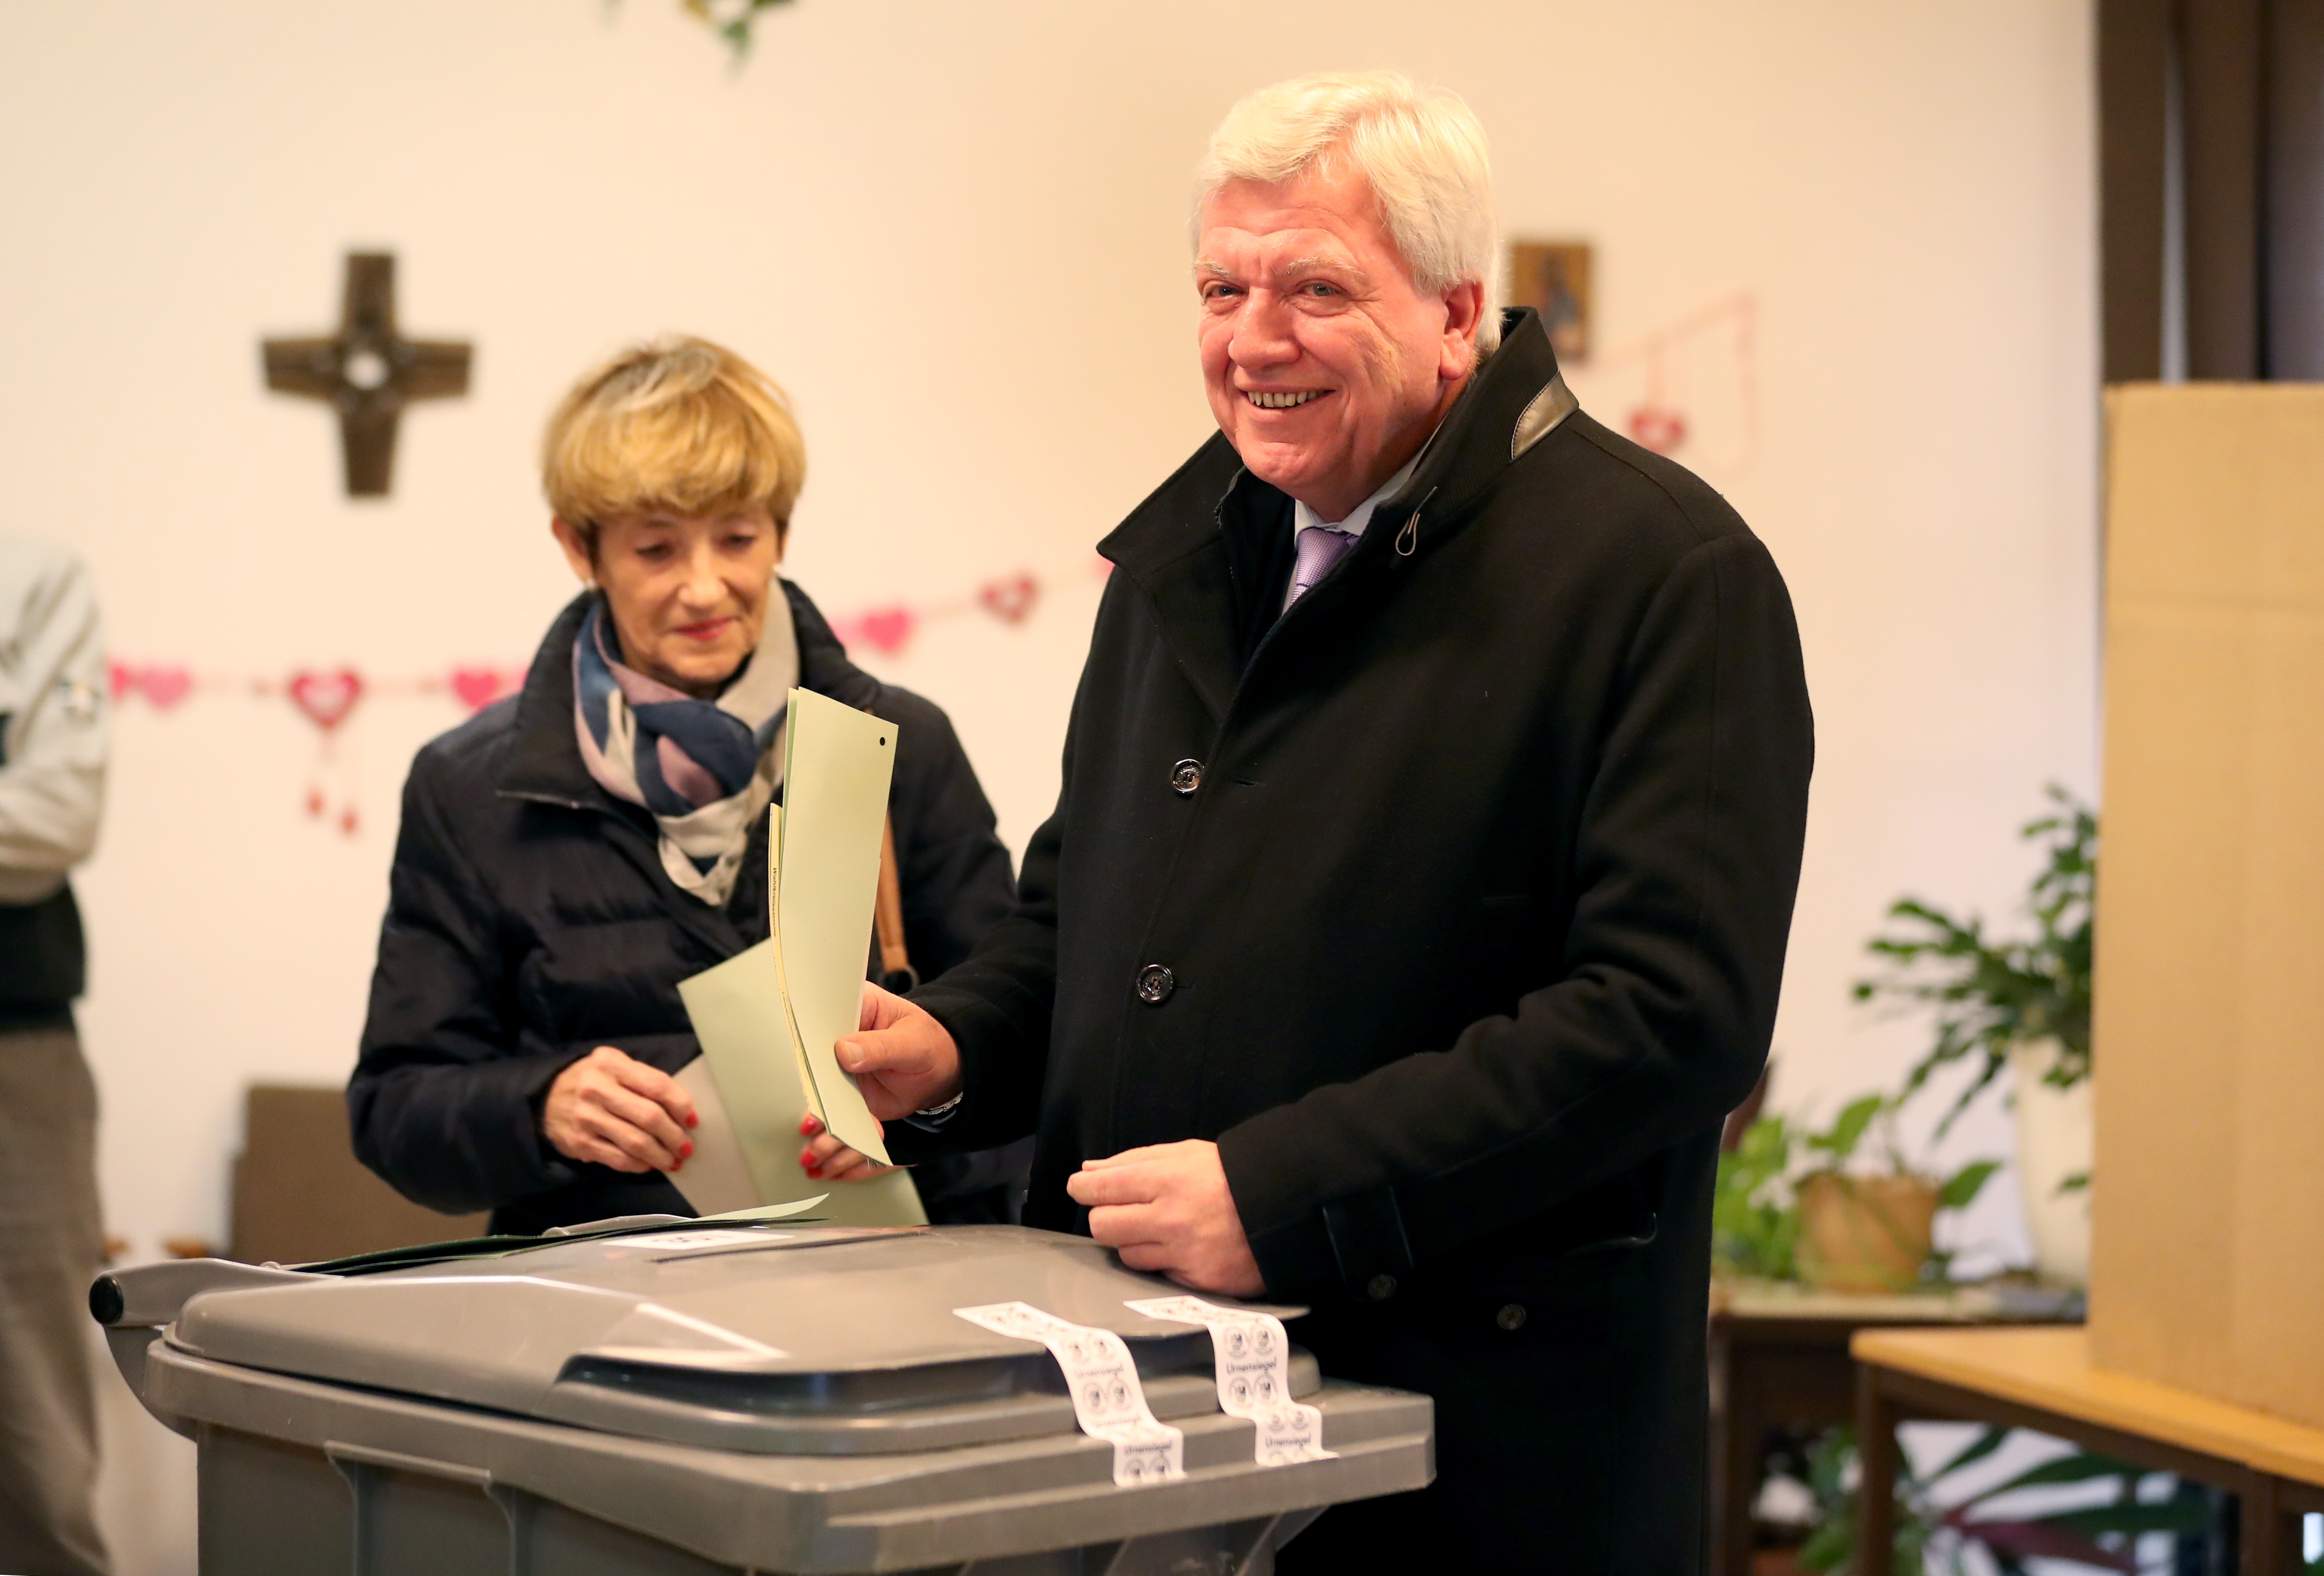 epa07126245 Prime Minister of Hesse, Volker Bouffier of the Christian Democratic Union (CDU) party, casts his ballot next to his wife Ursula Bouffier during the Hesse state elections at a polling station in Giessen, Germany, 28 October 2018. According to the Statistical Office of Hesse some 4.4 million people are eligible to vote in the regional elections for a new parliament in the German state of Hesse.  EPA/FRIEDEMANN VOGEL